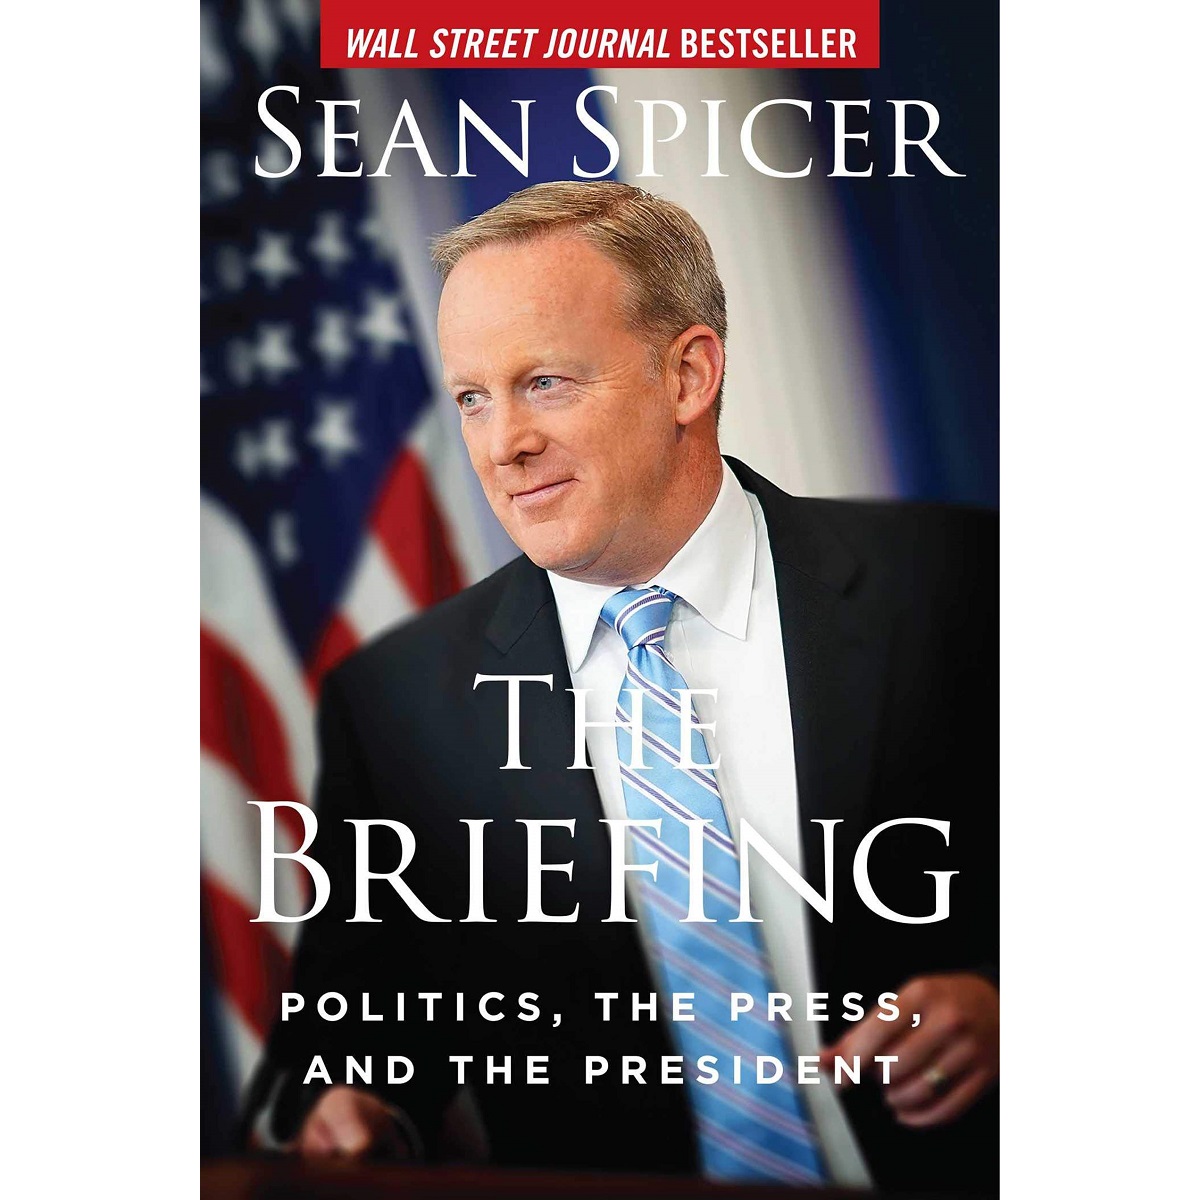 The Briefing: Politics, the Press, and the President by Sean Spicer